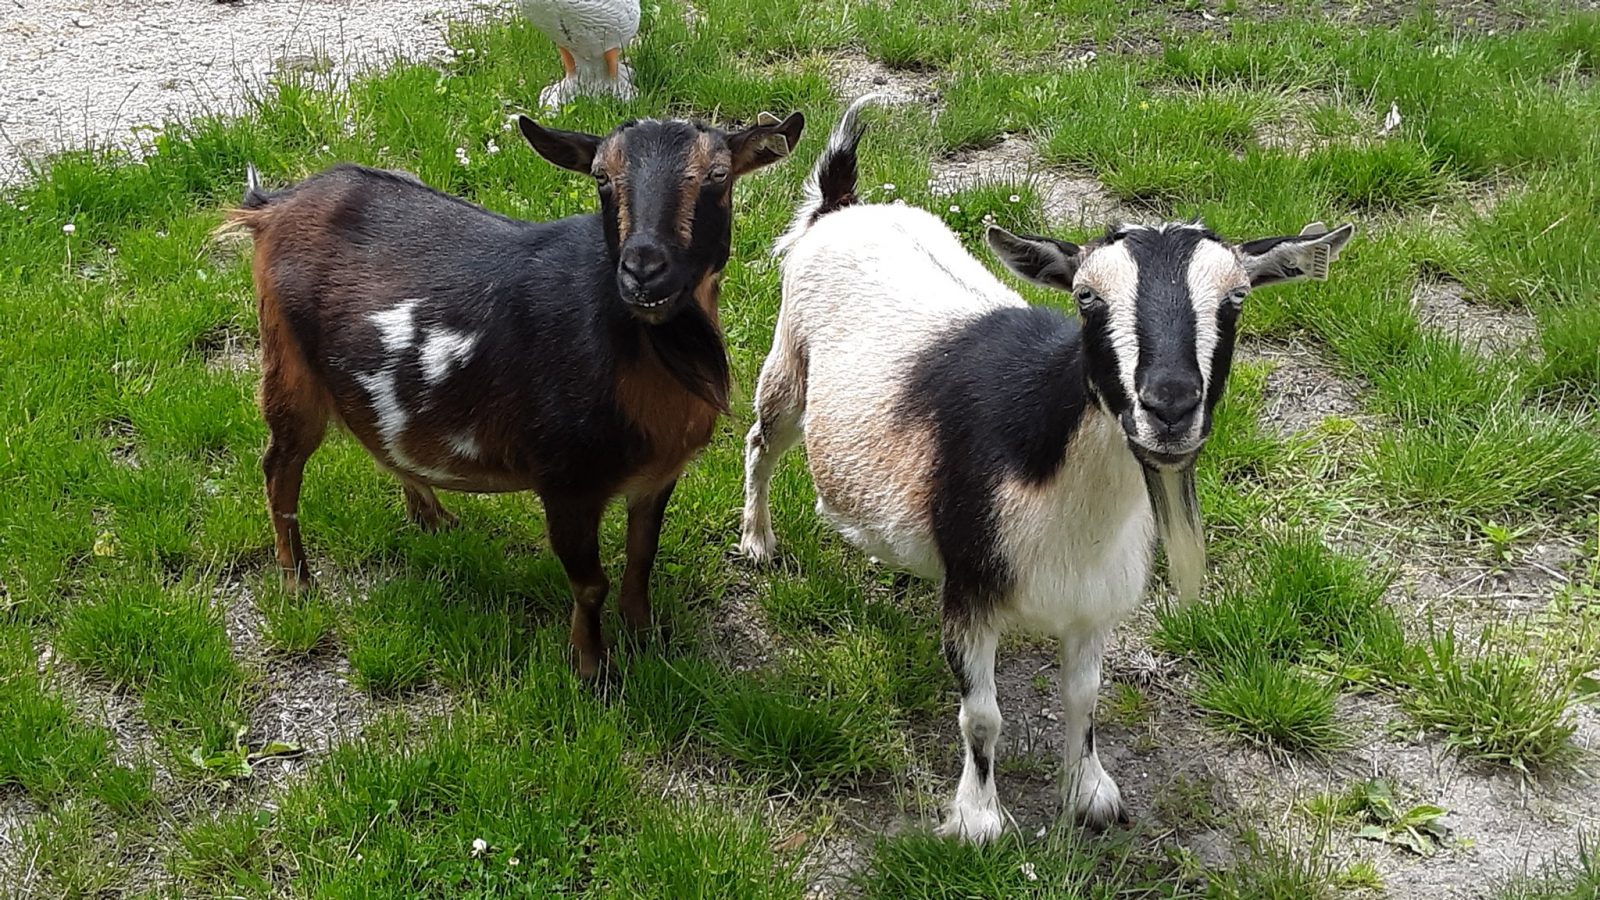 Chocolate and Vanilla goats at their new home